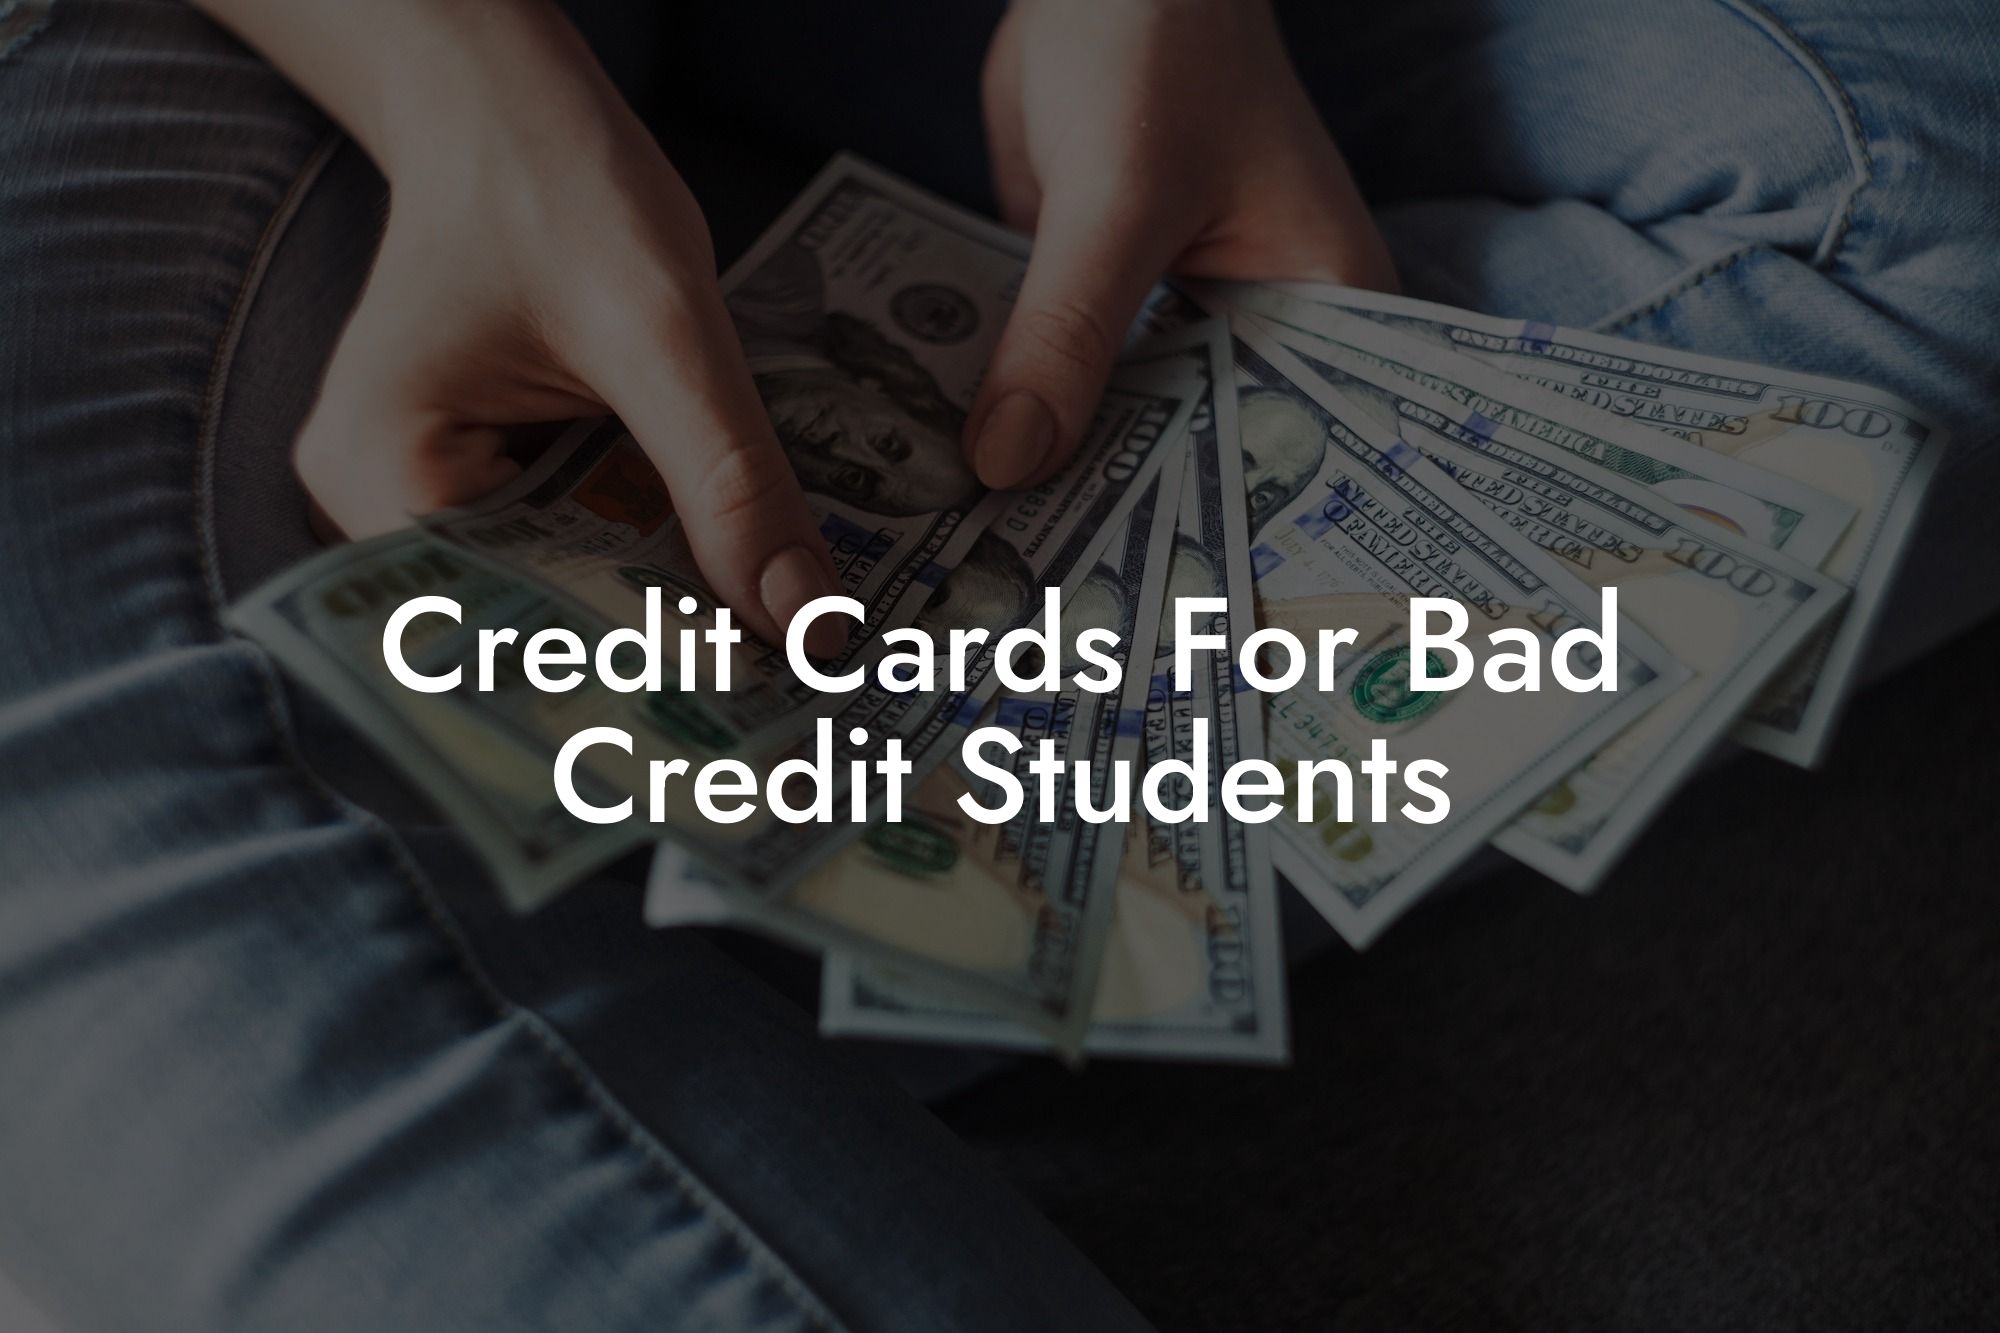 Credit Cards For Bad Credit Students